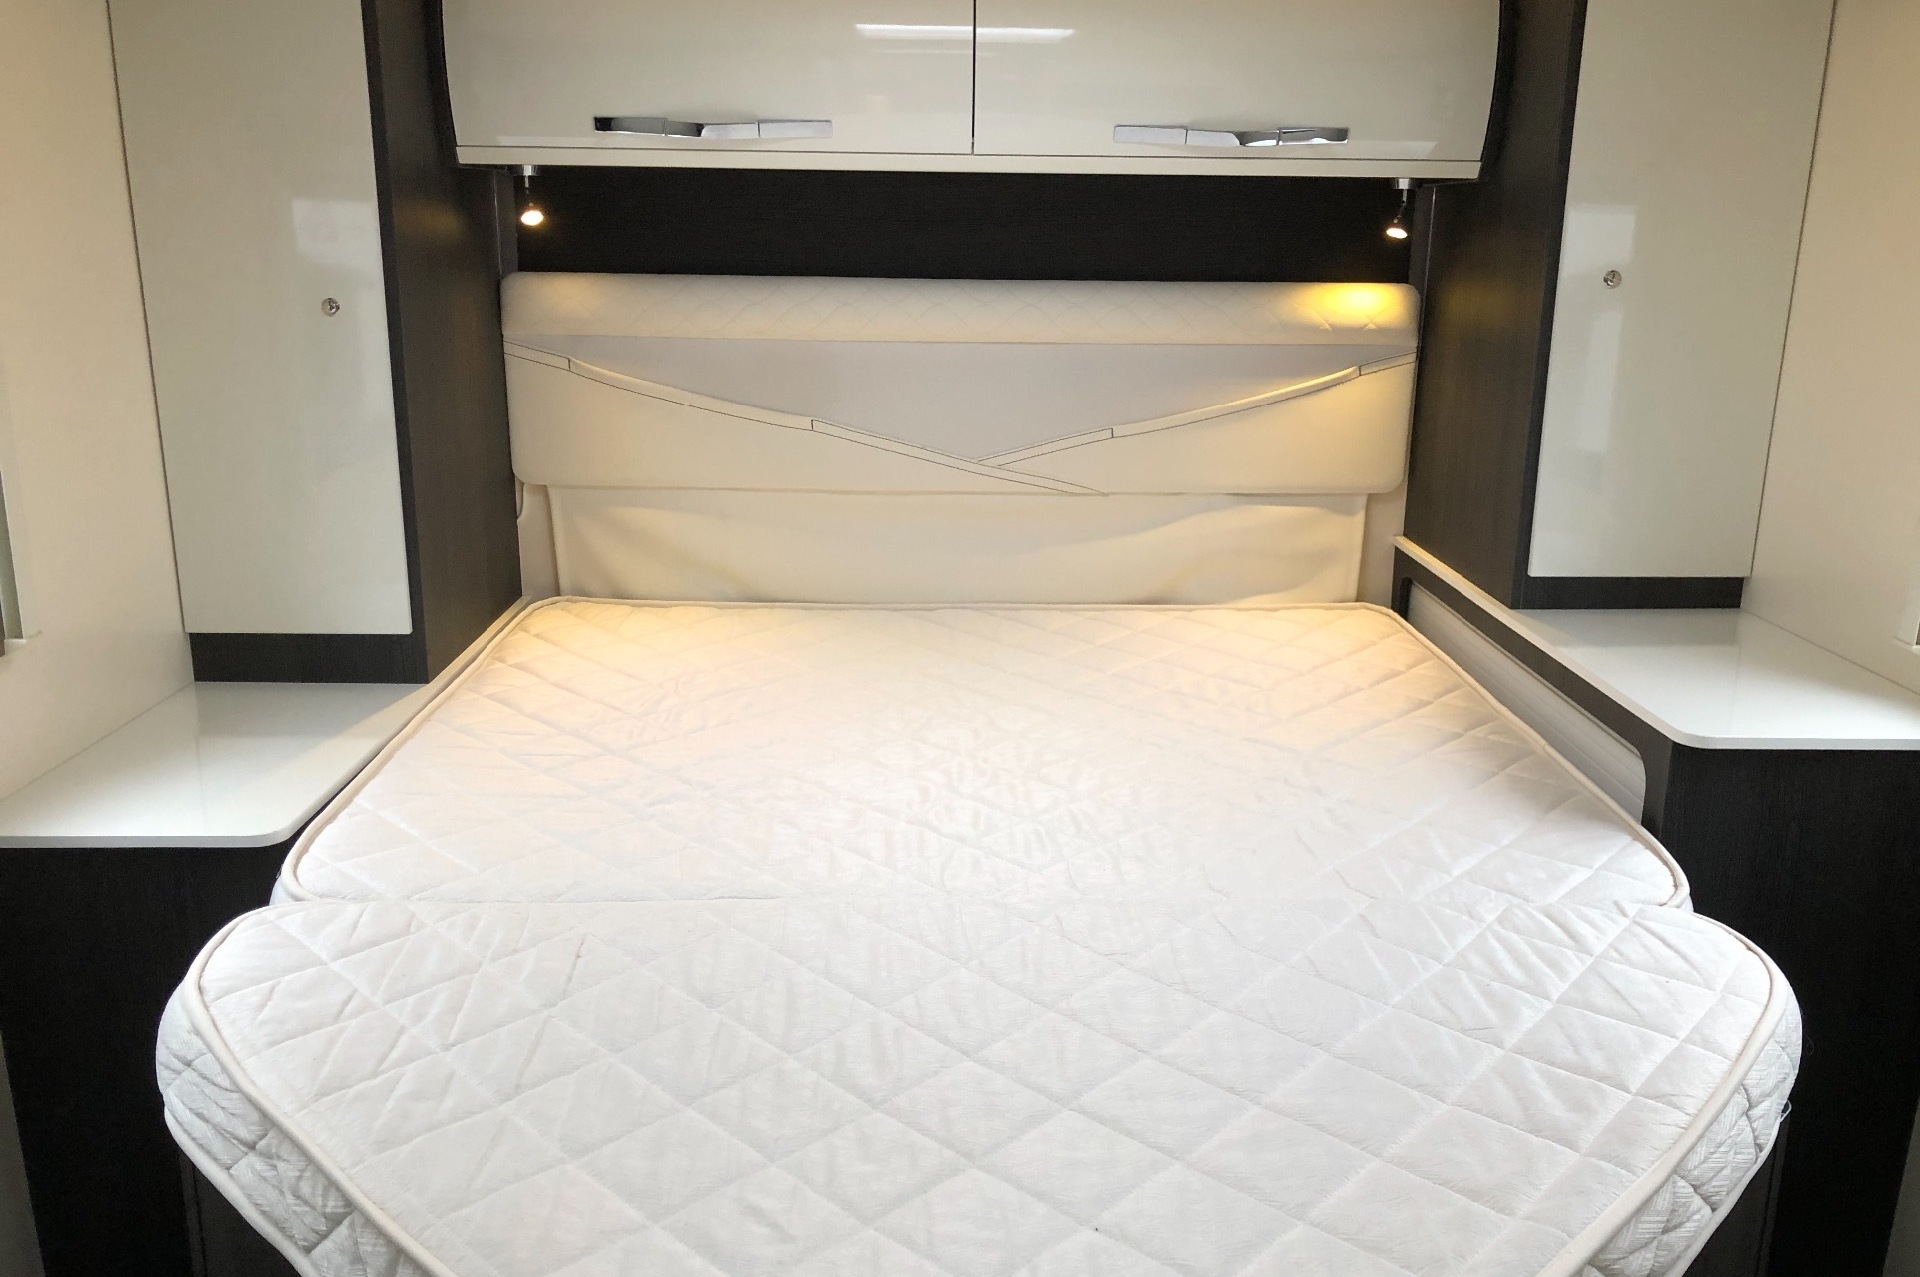 Motorhome rental with fixed Island bed